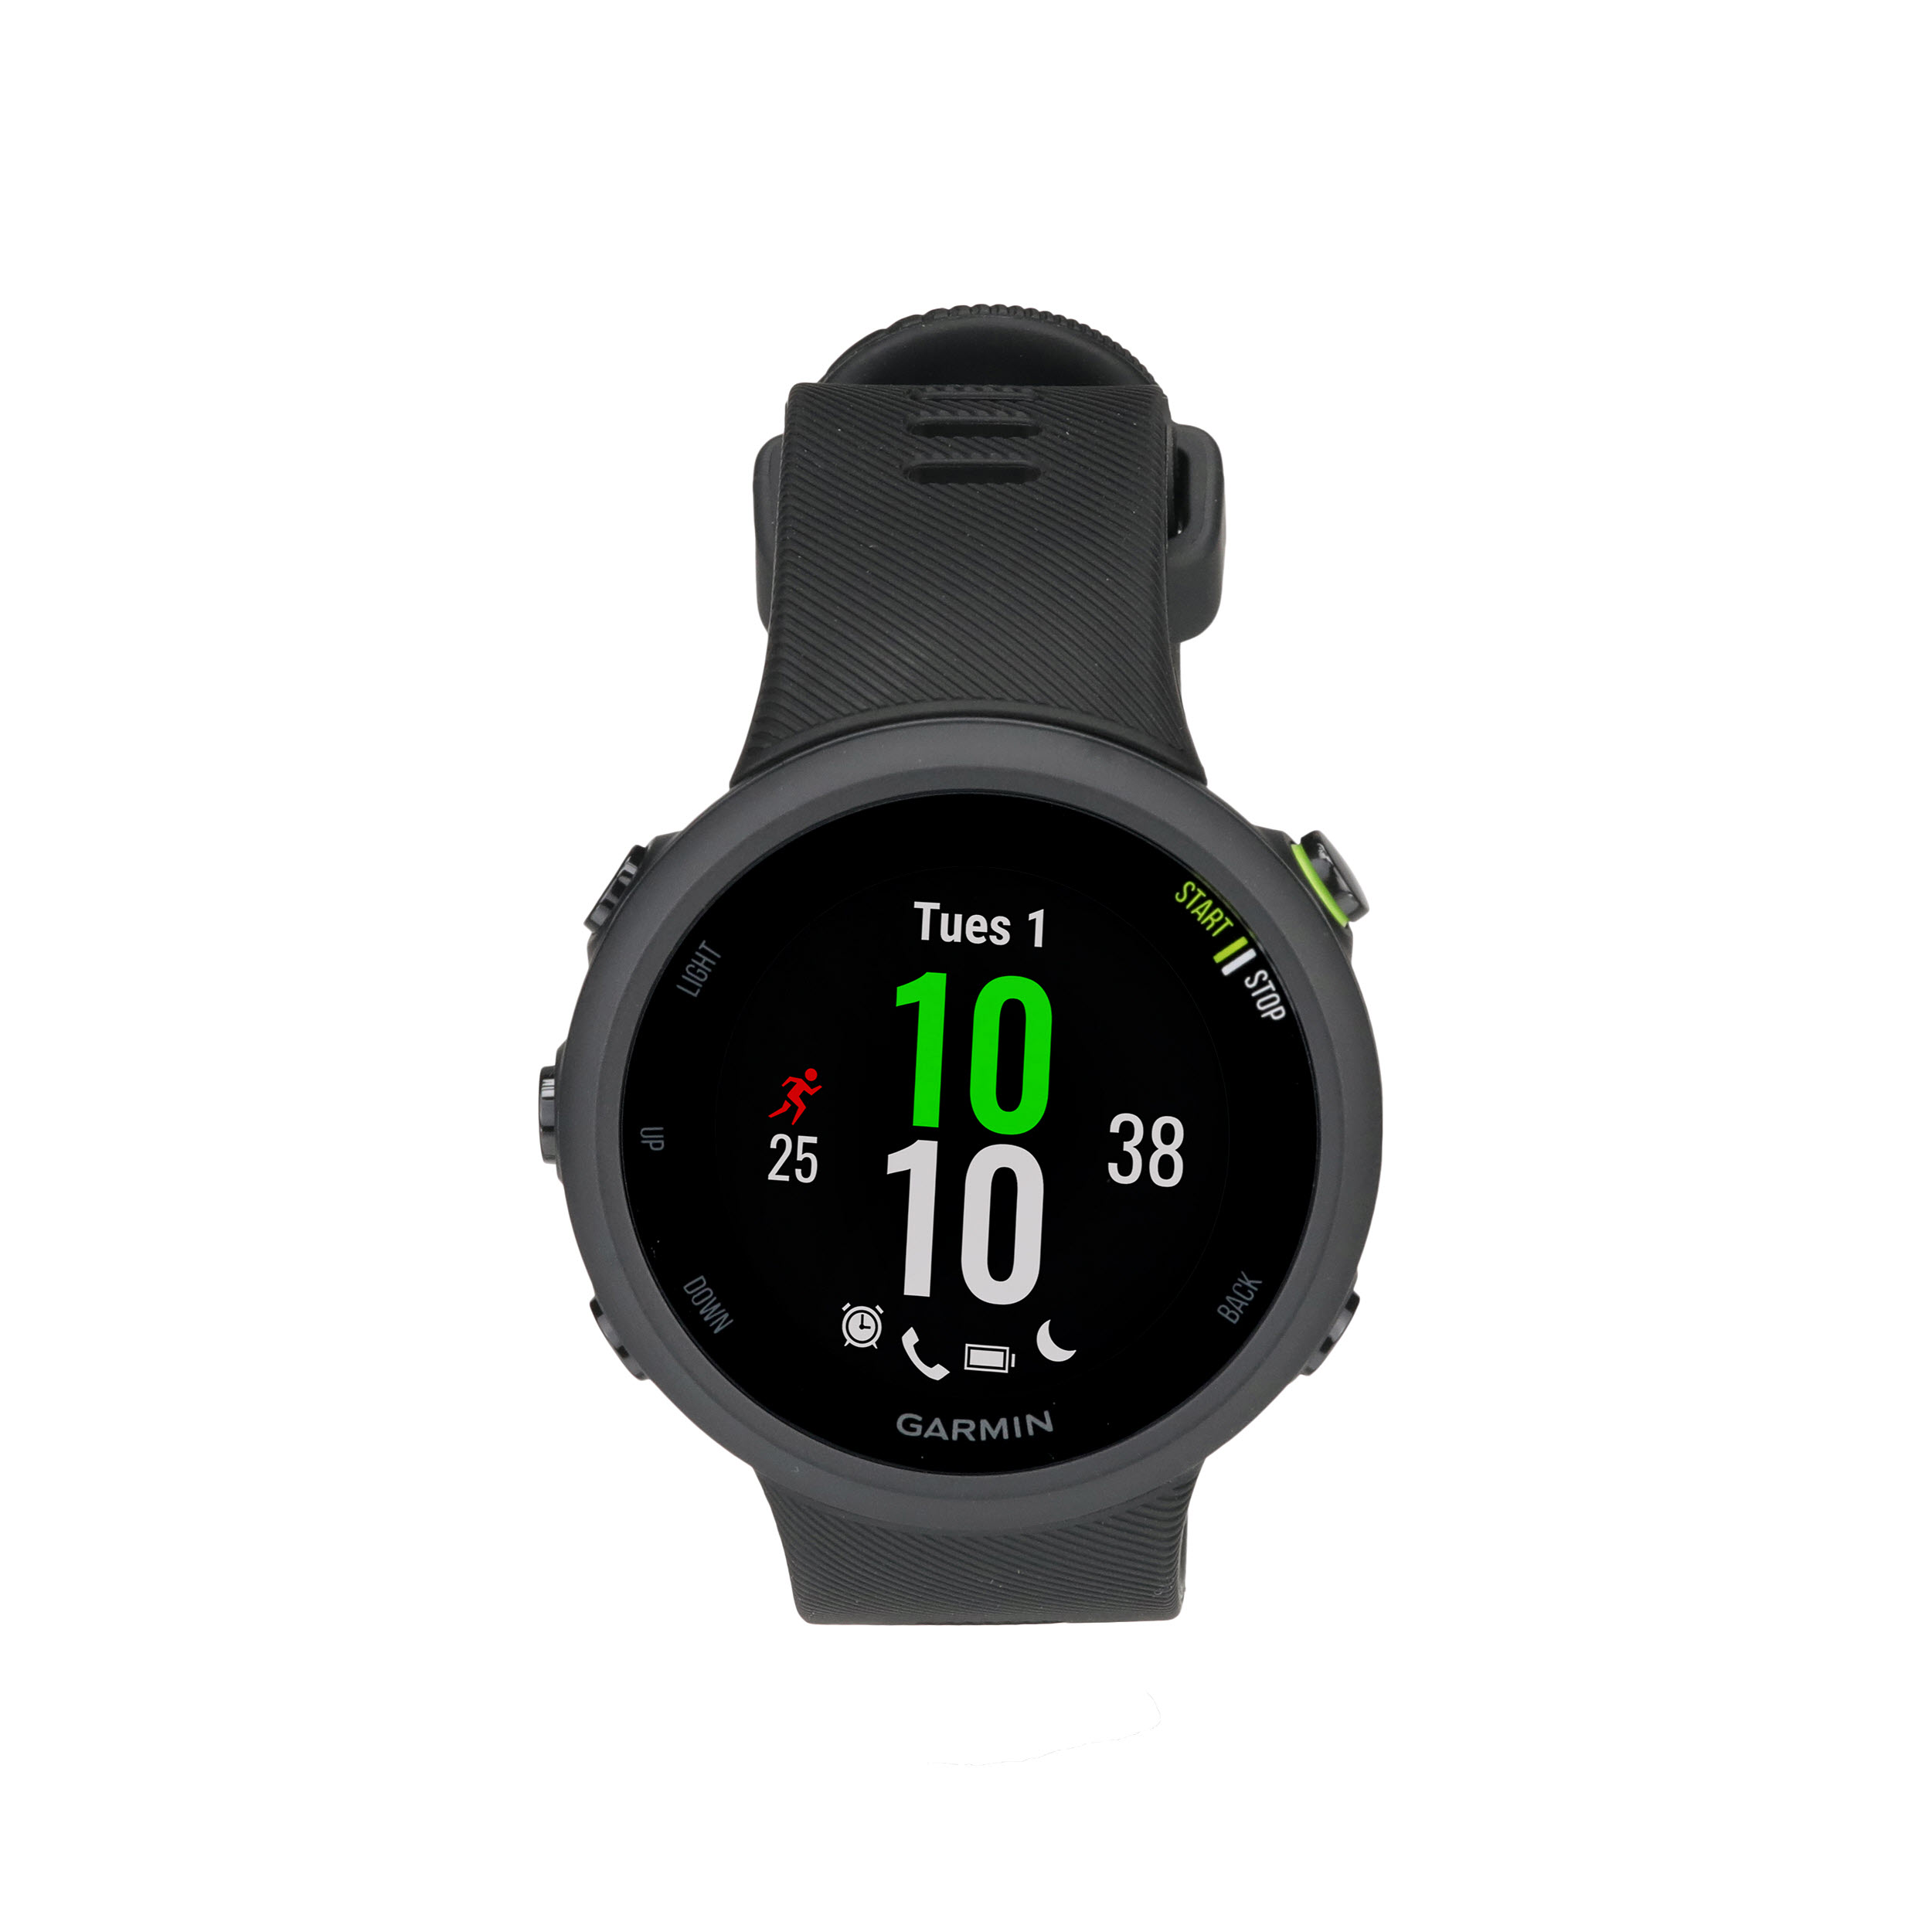  Garmin 010-02156-05 Forerunner 45, 42mm Easy-to-use GPS Running  Watch with Coach Free Training Plan Support, Black : Electronics